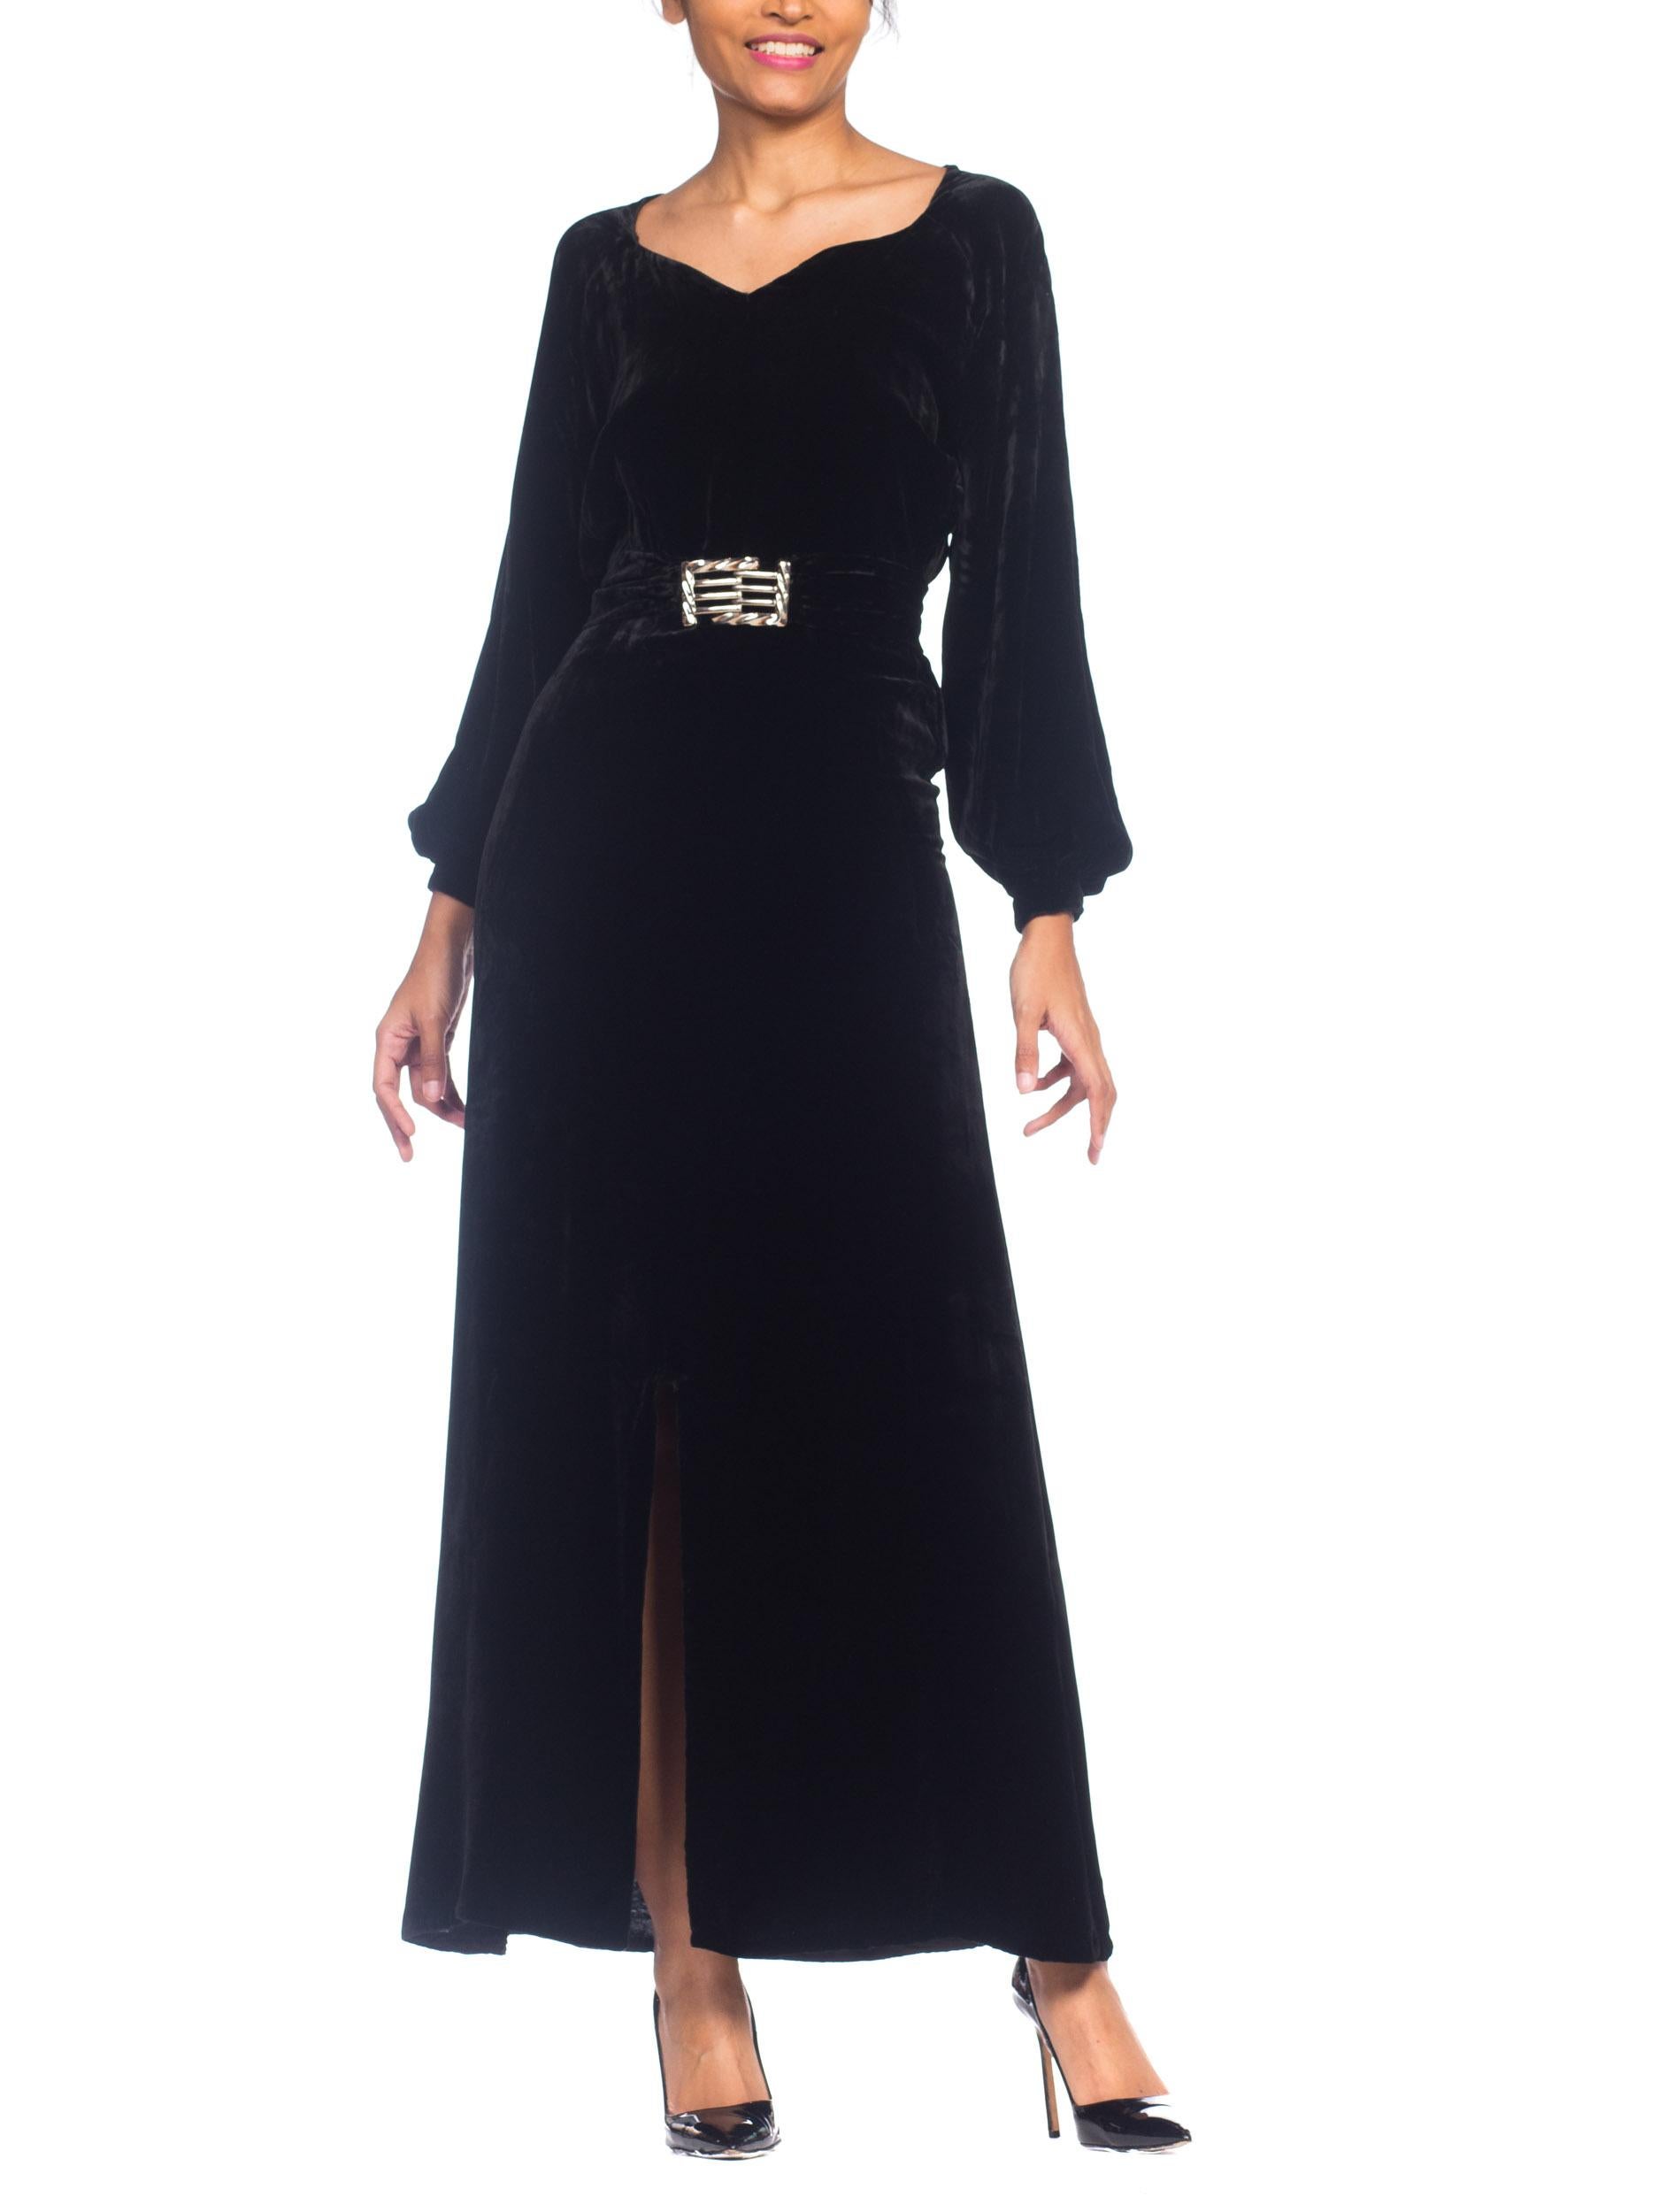 long sleeved black gown